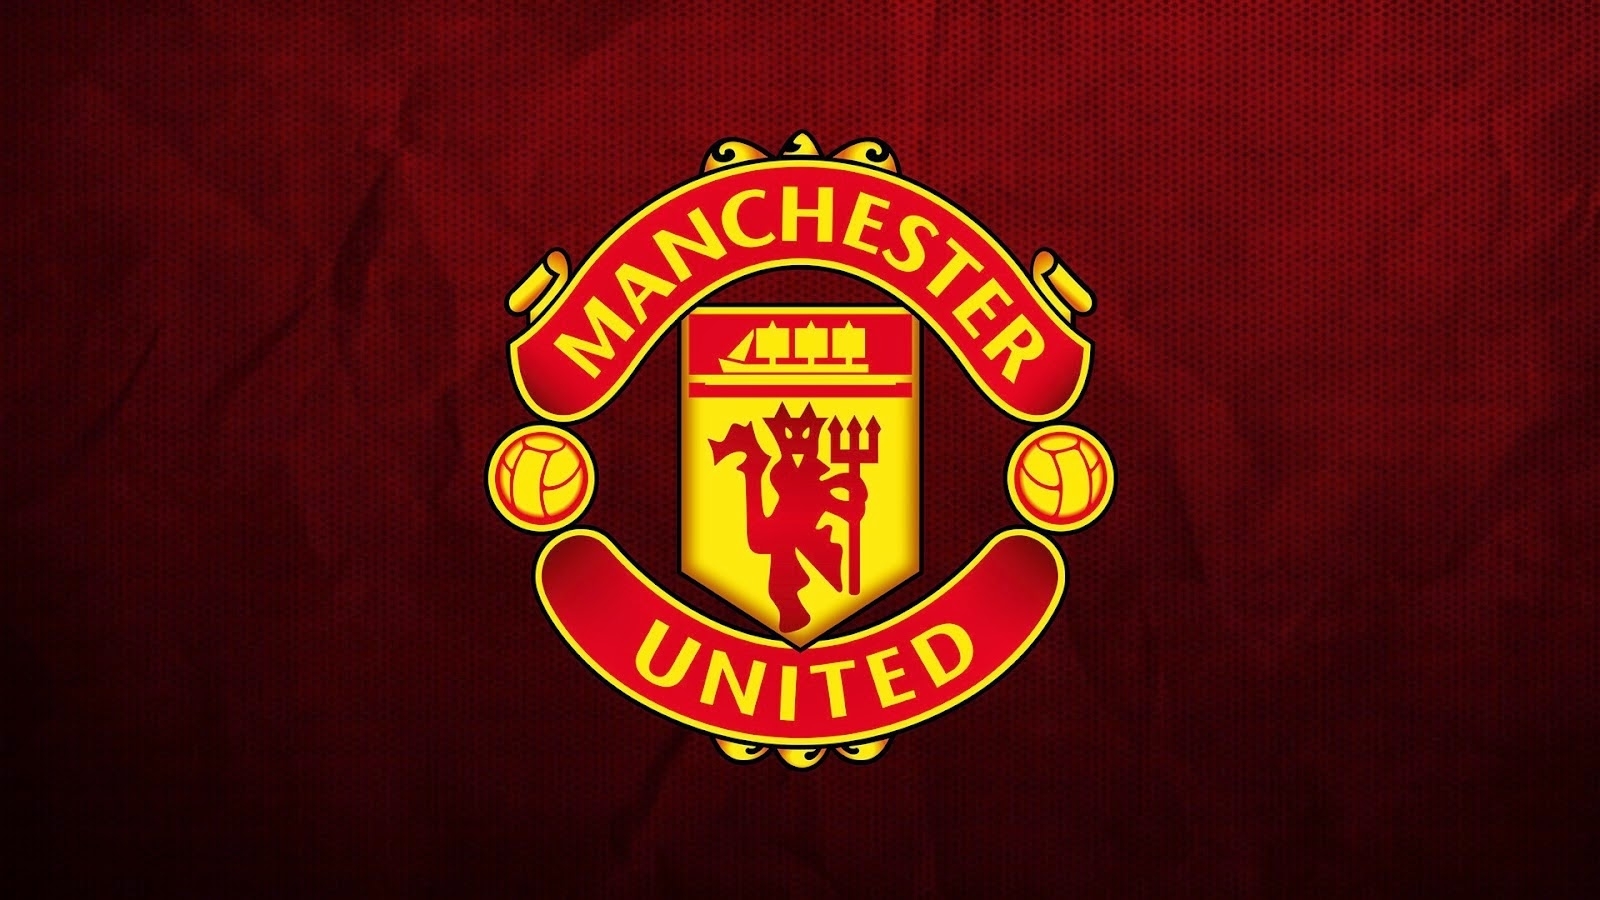 10 New Manchester United Wallpaper Hd FULL HD 1080p For PC Background